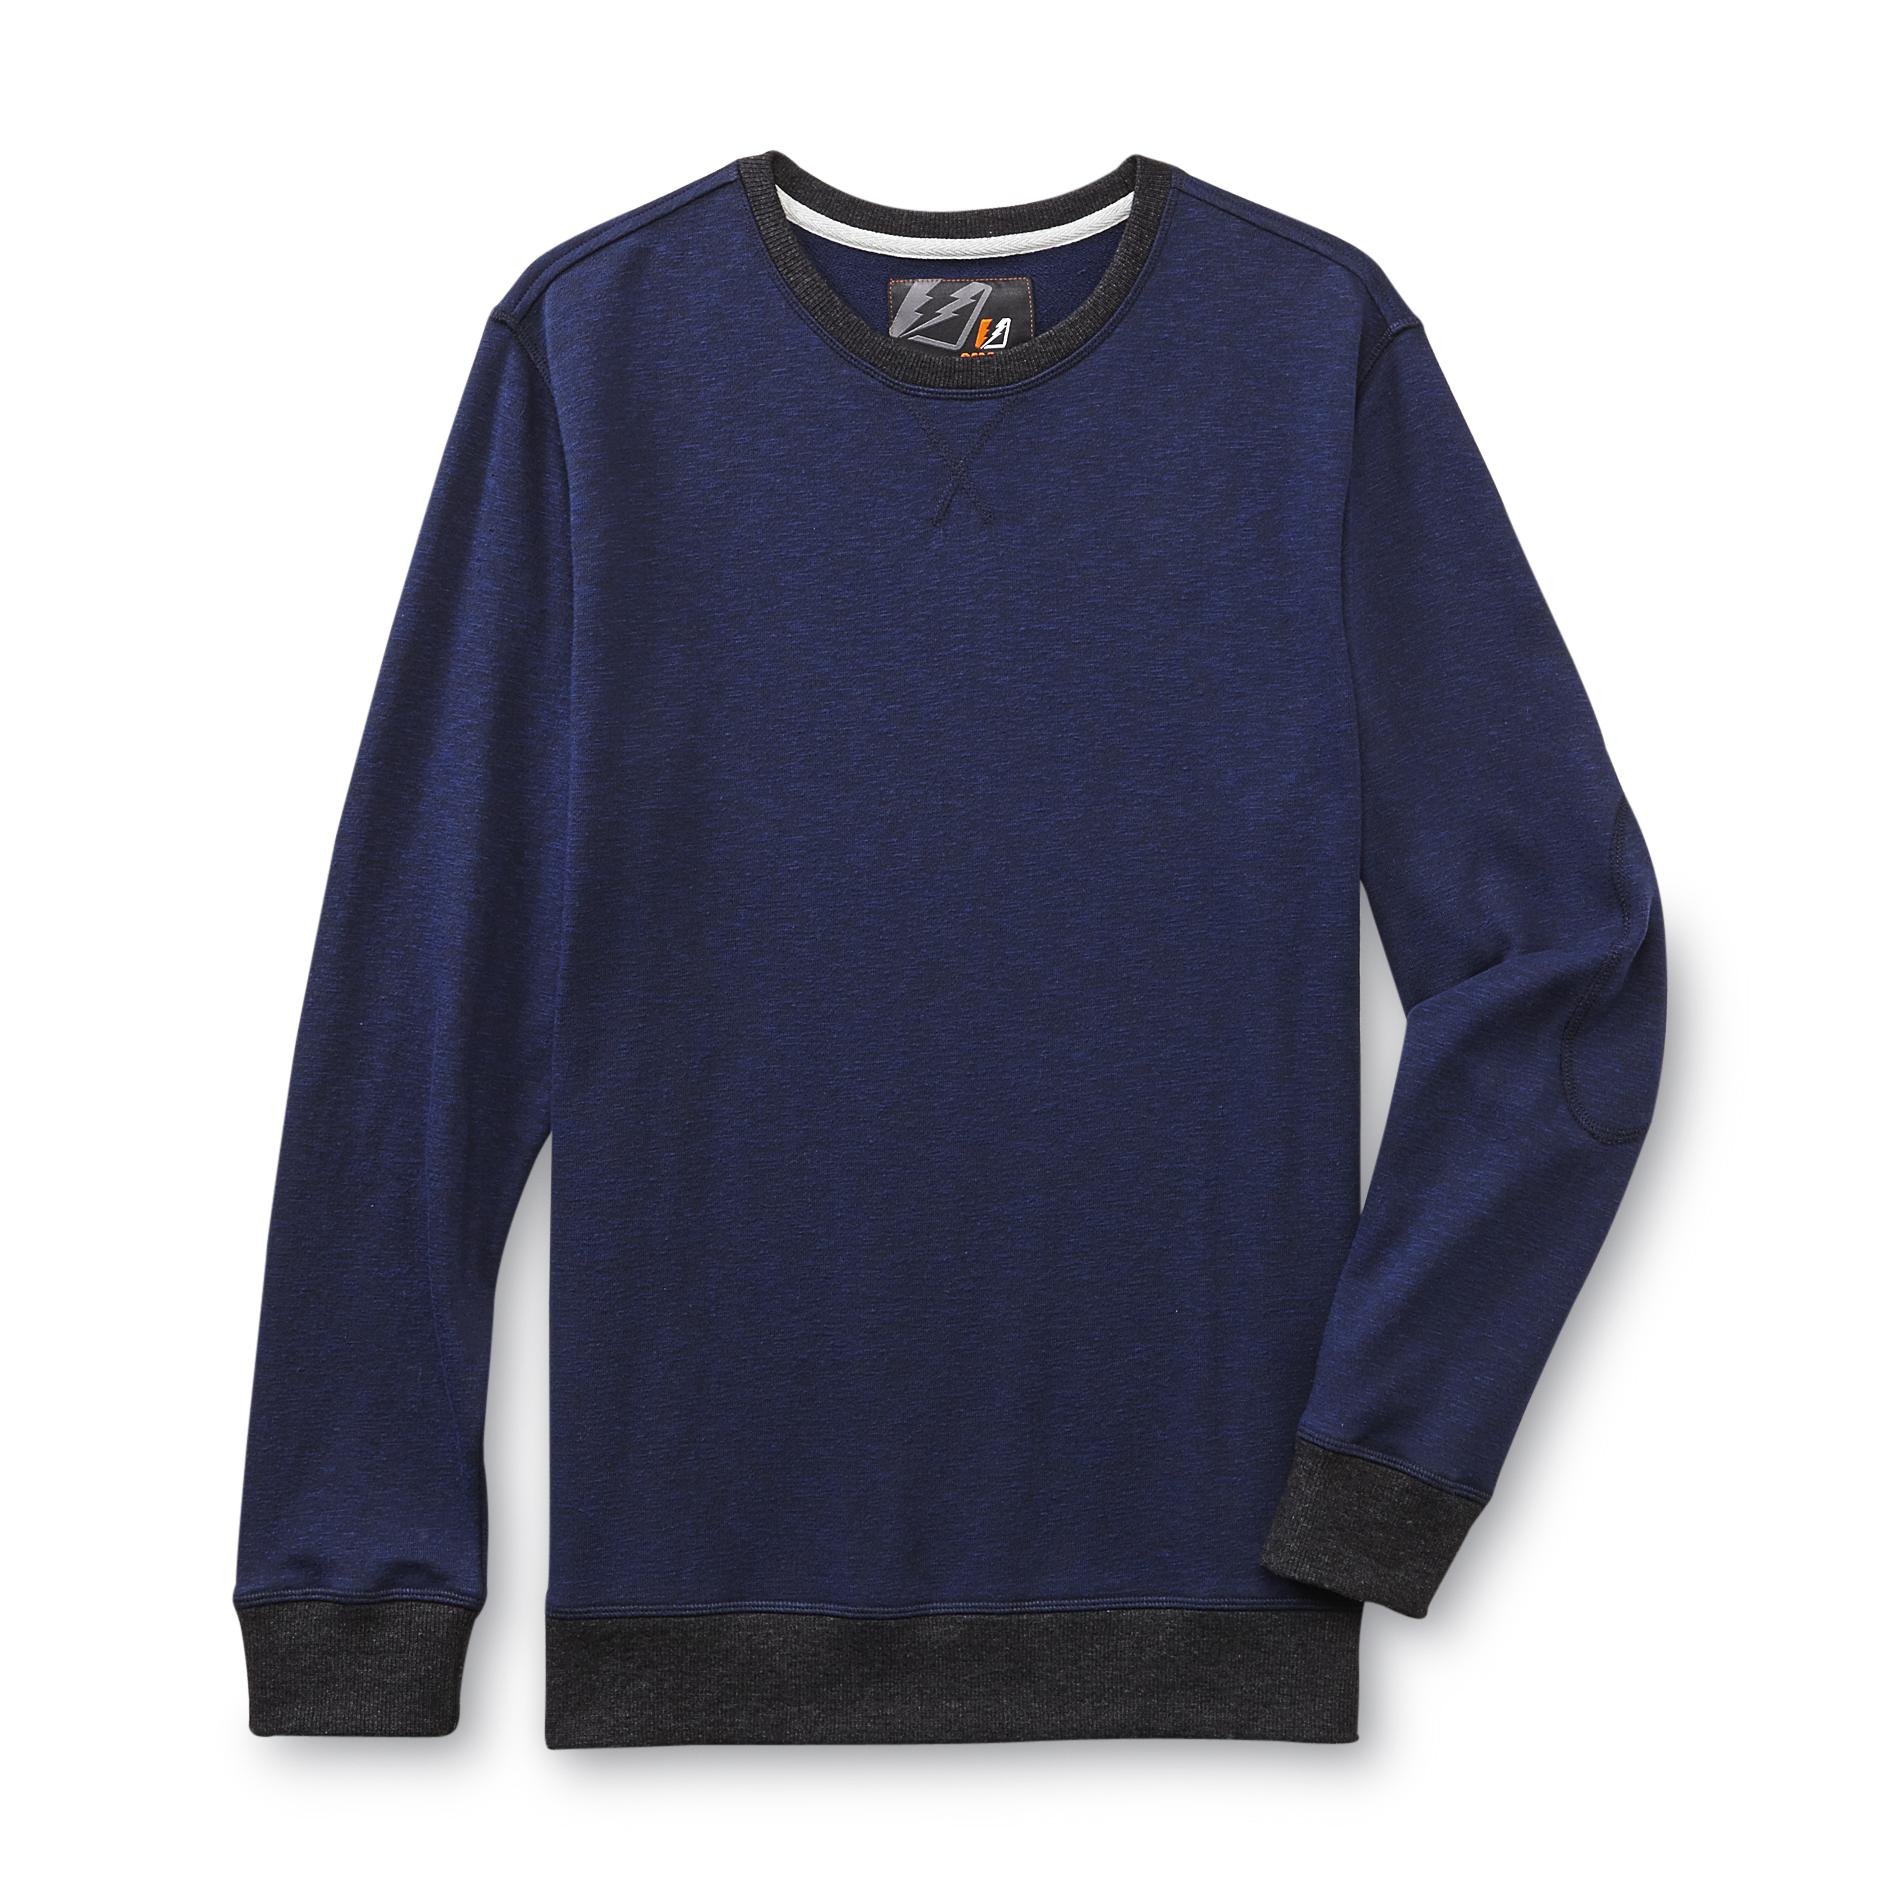 Amplify Young Men's Crew Neck Sweatshirt - Space Dyed